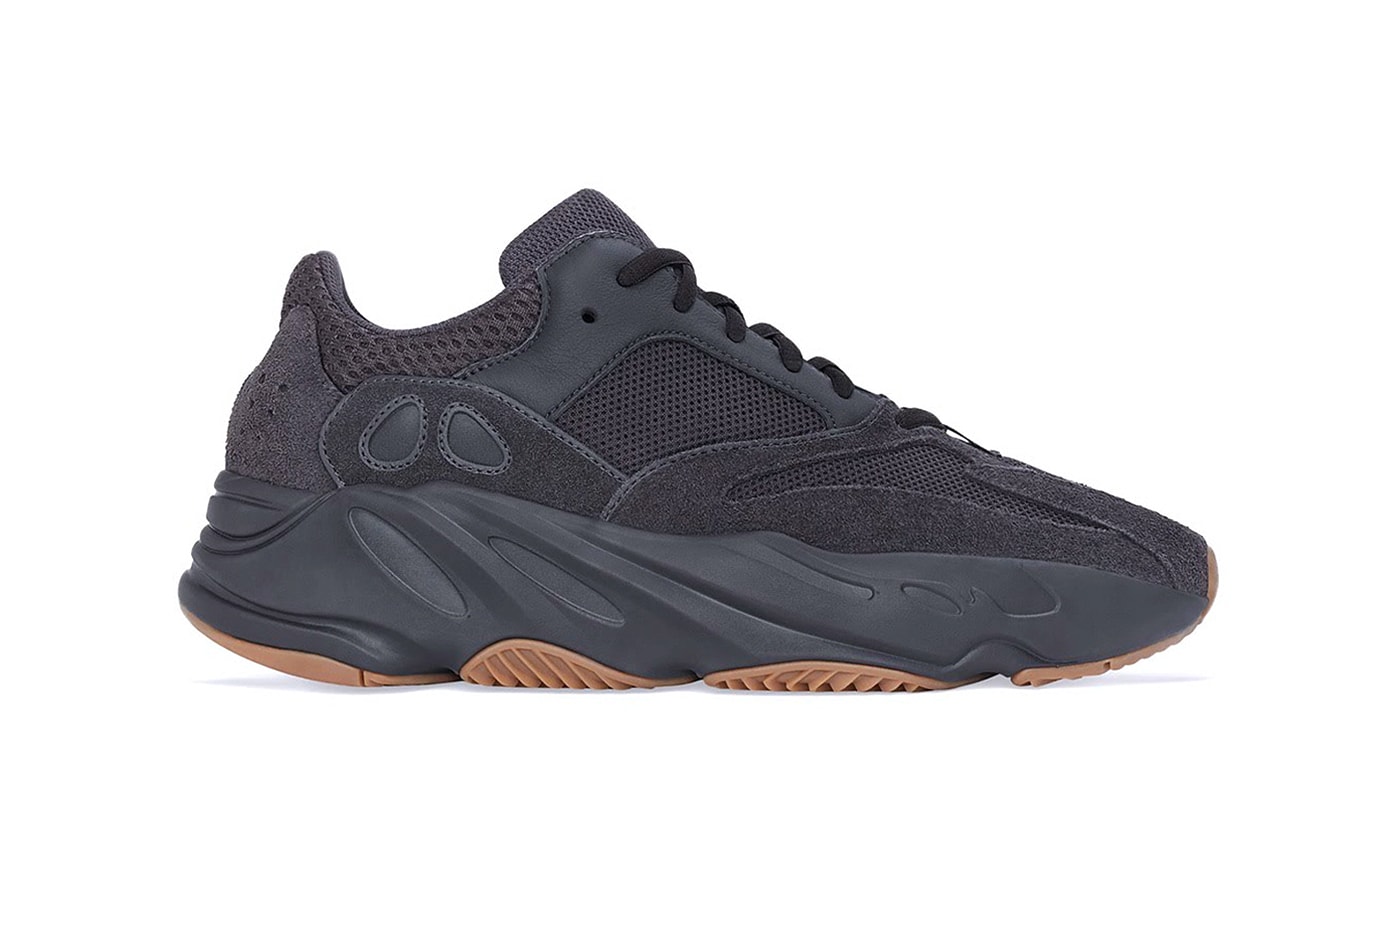 adidas YEEZY BOOST 700 Utility Black Re-Release Info fv5304 Date Buy Price Kanye West